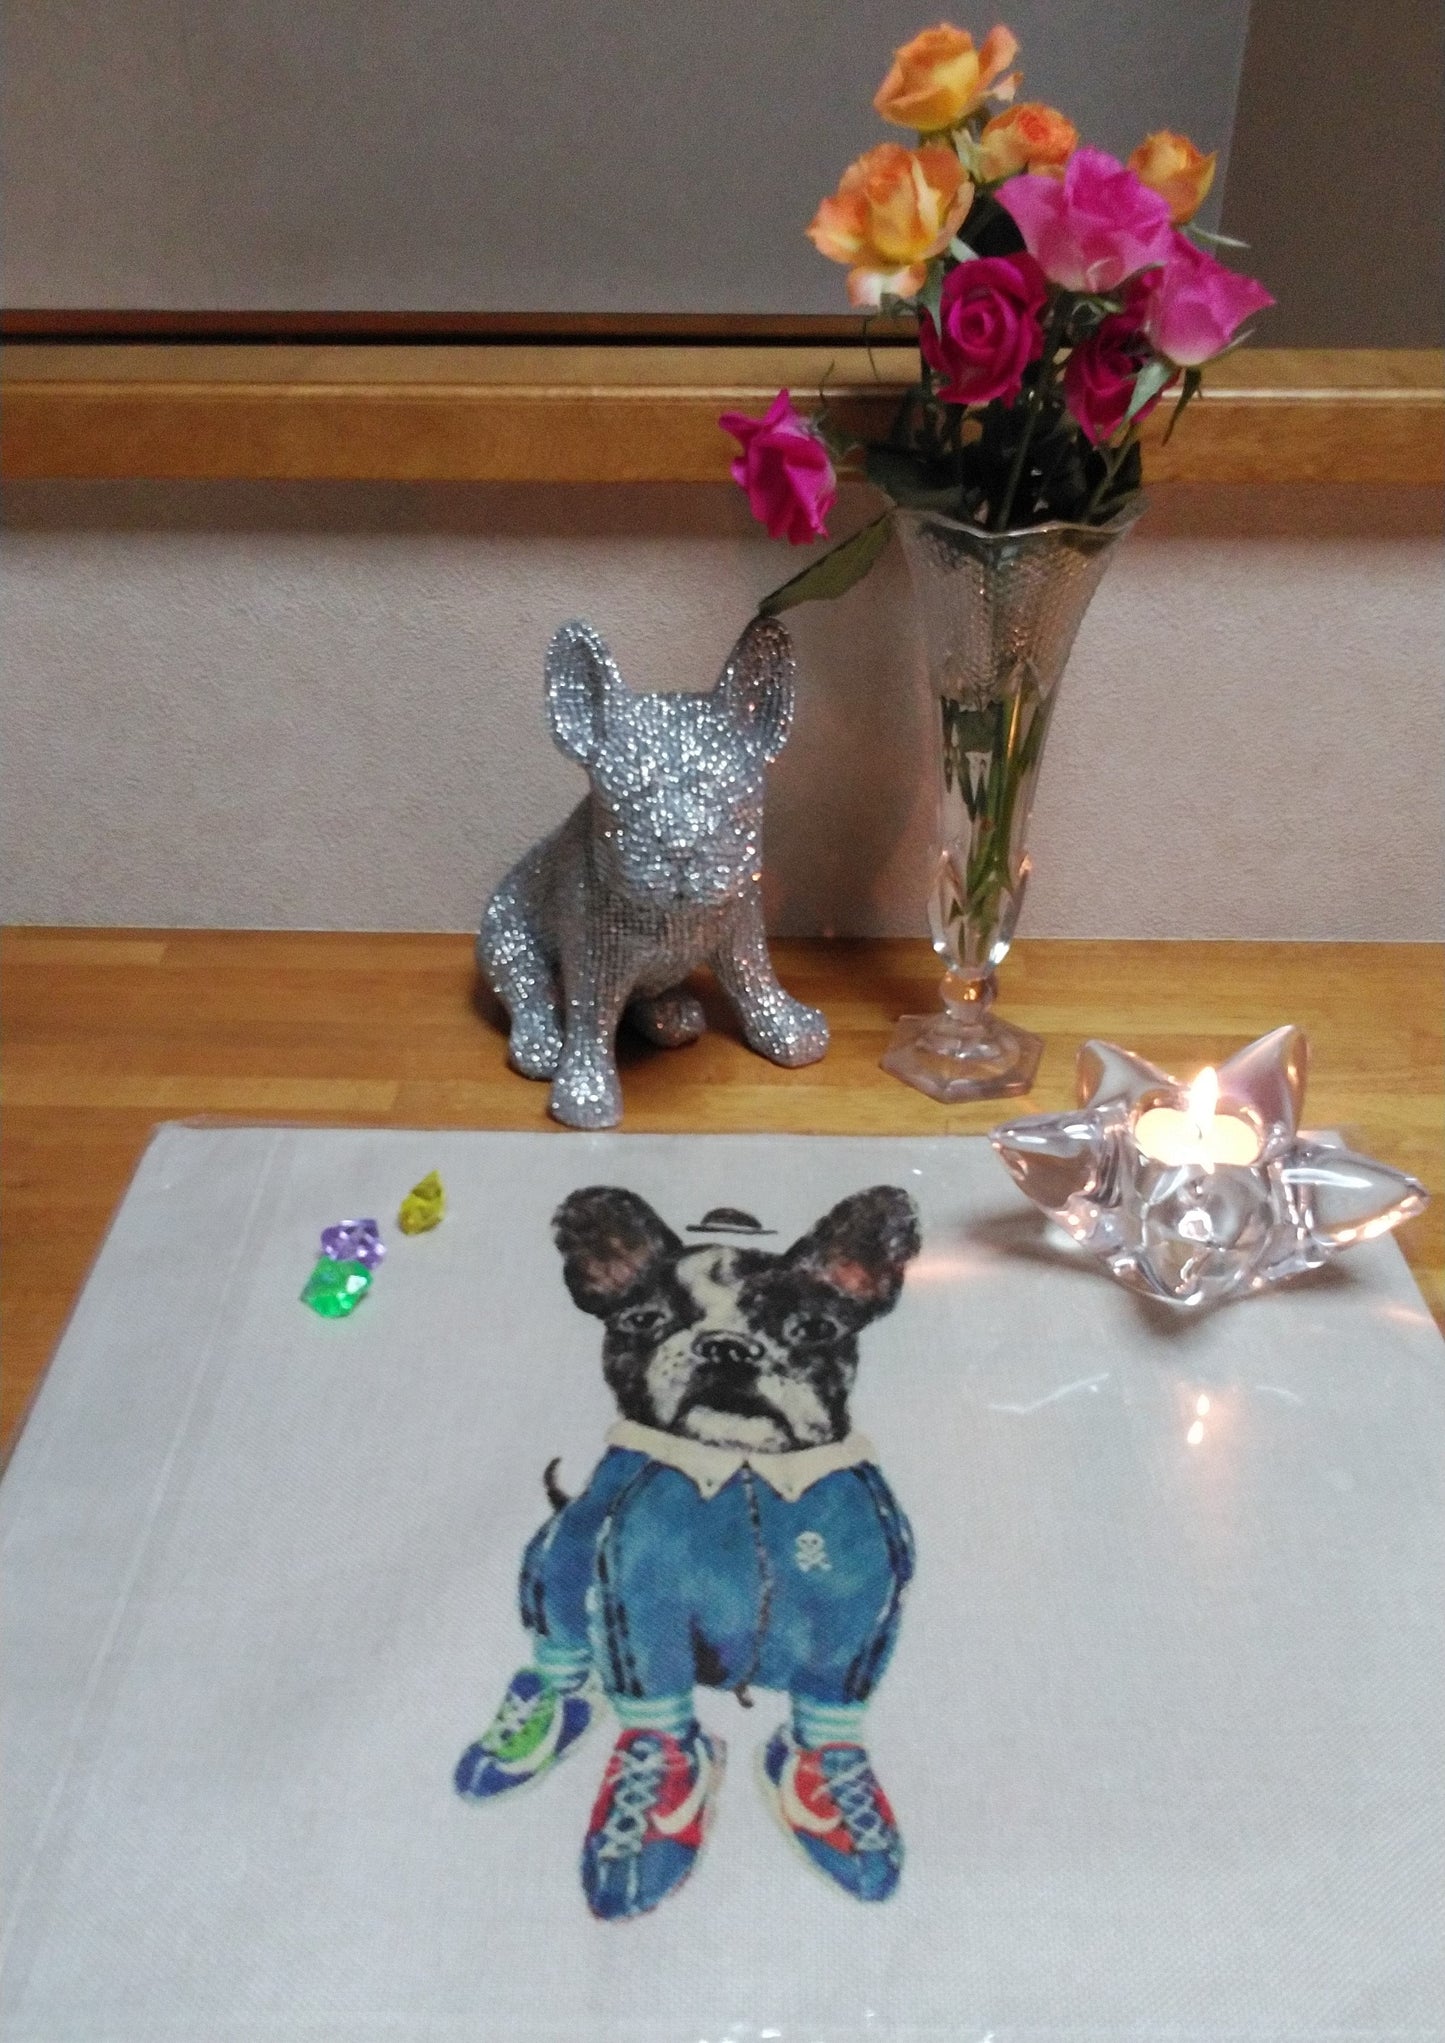 French bulldog table mat full of smiles on the table